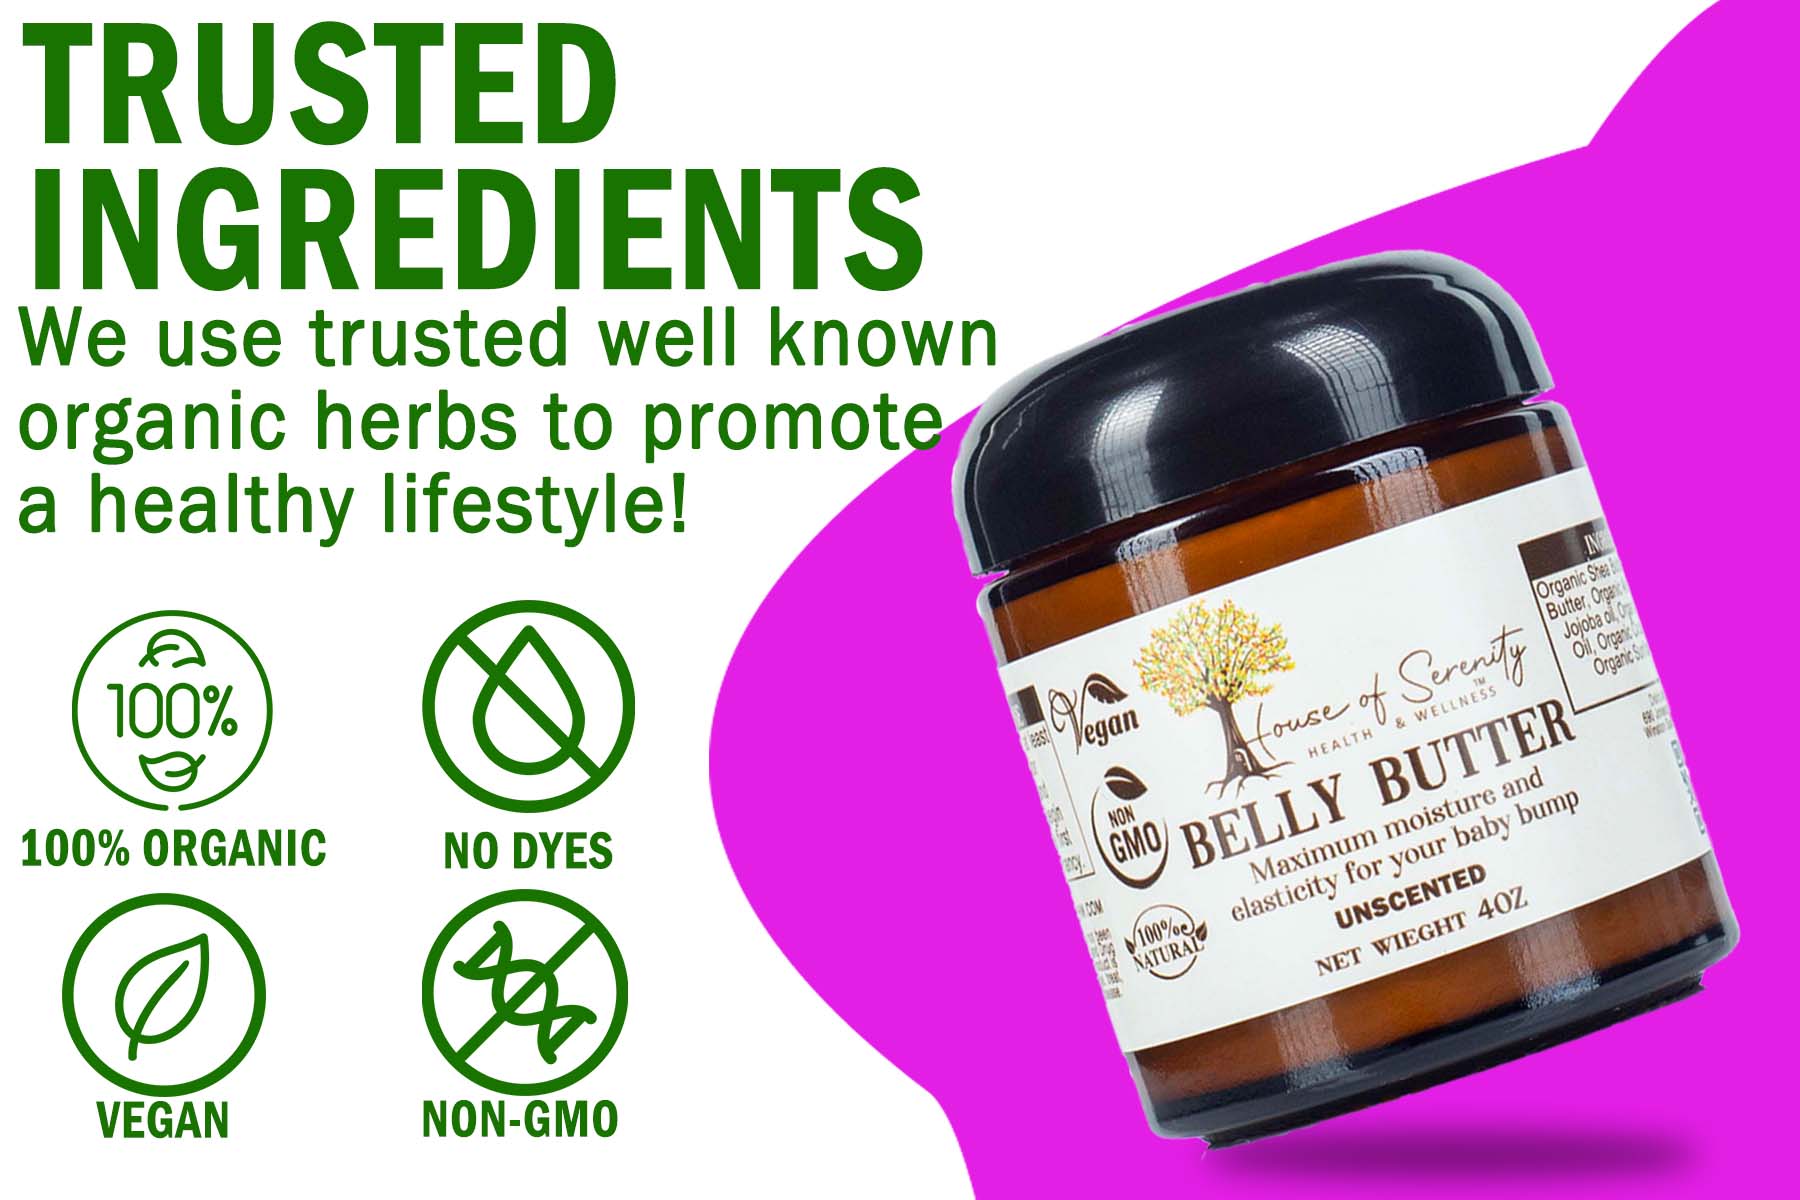 Belly Butter Graphic.